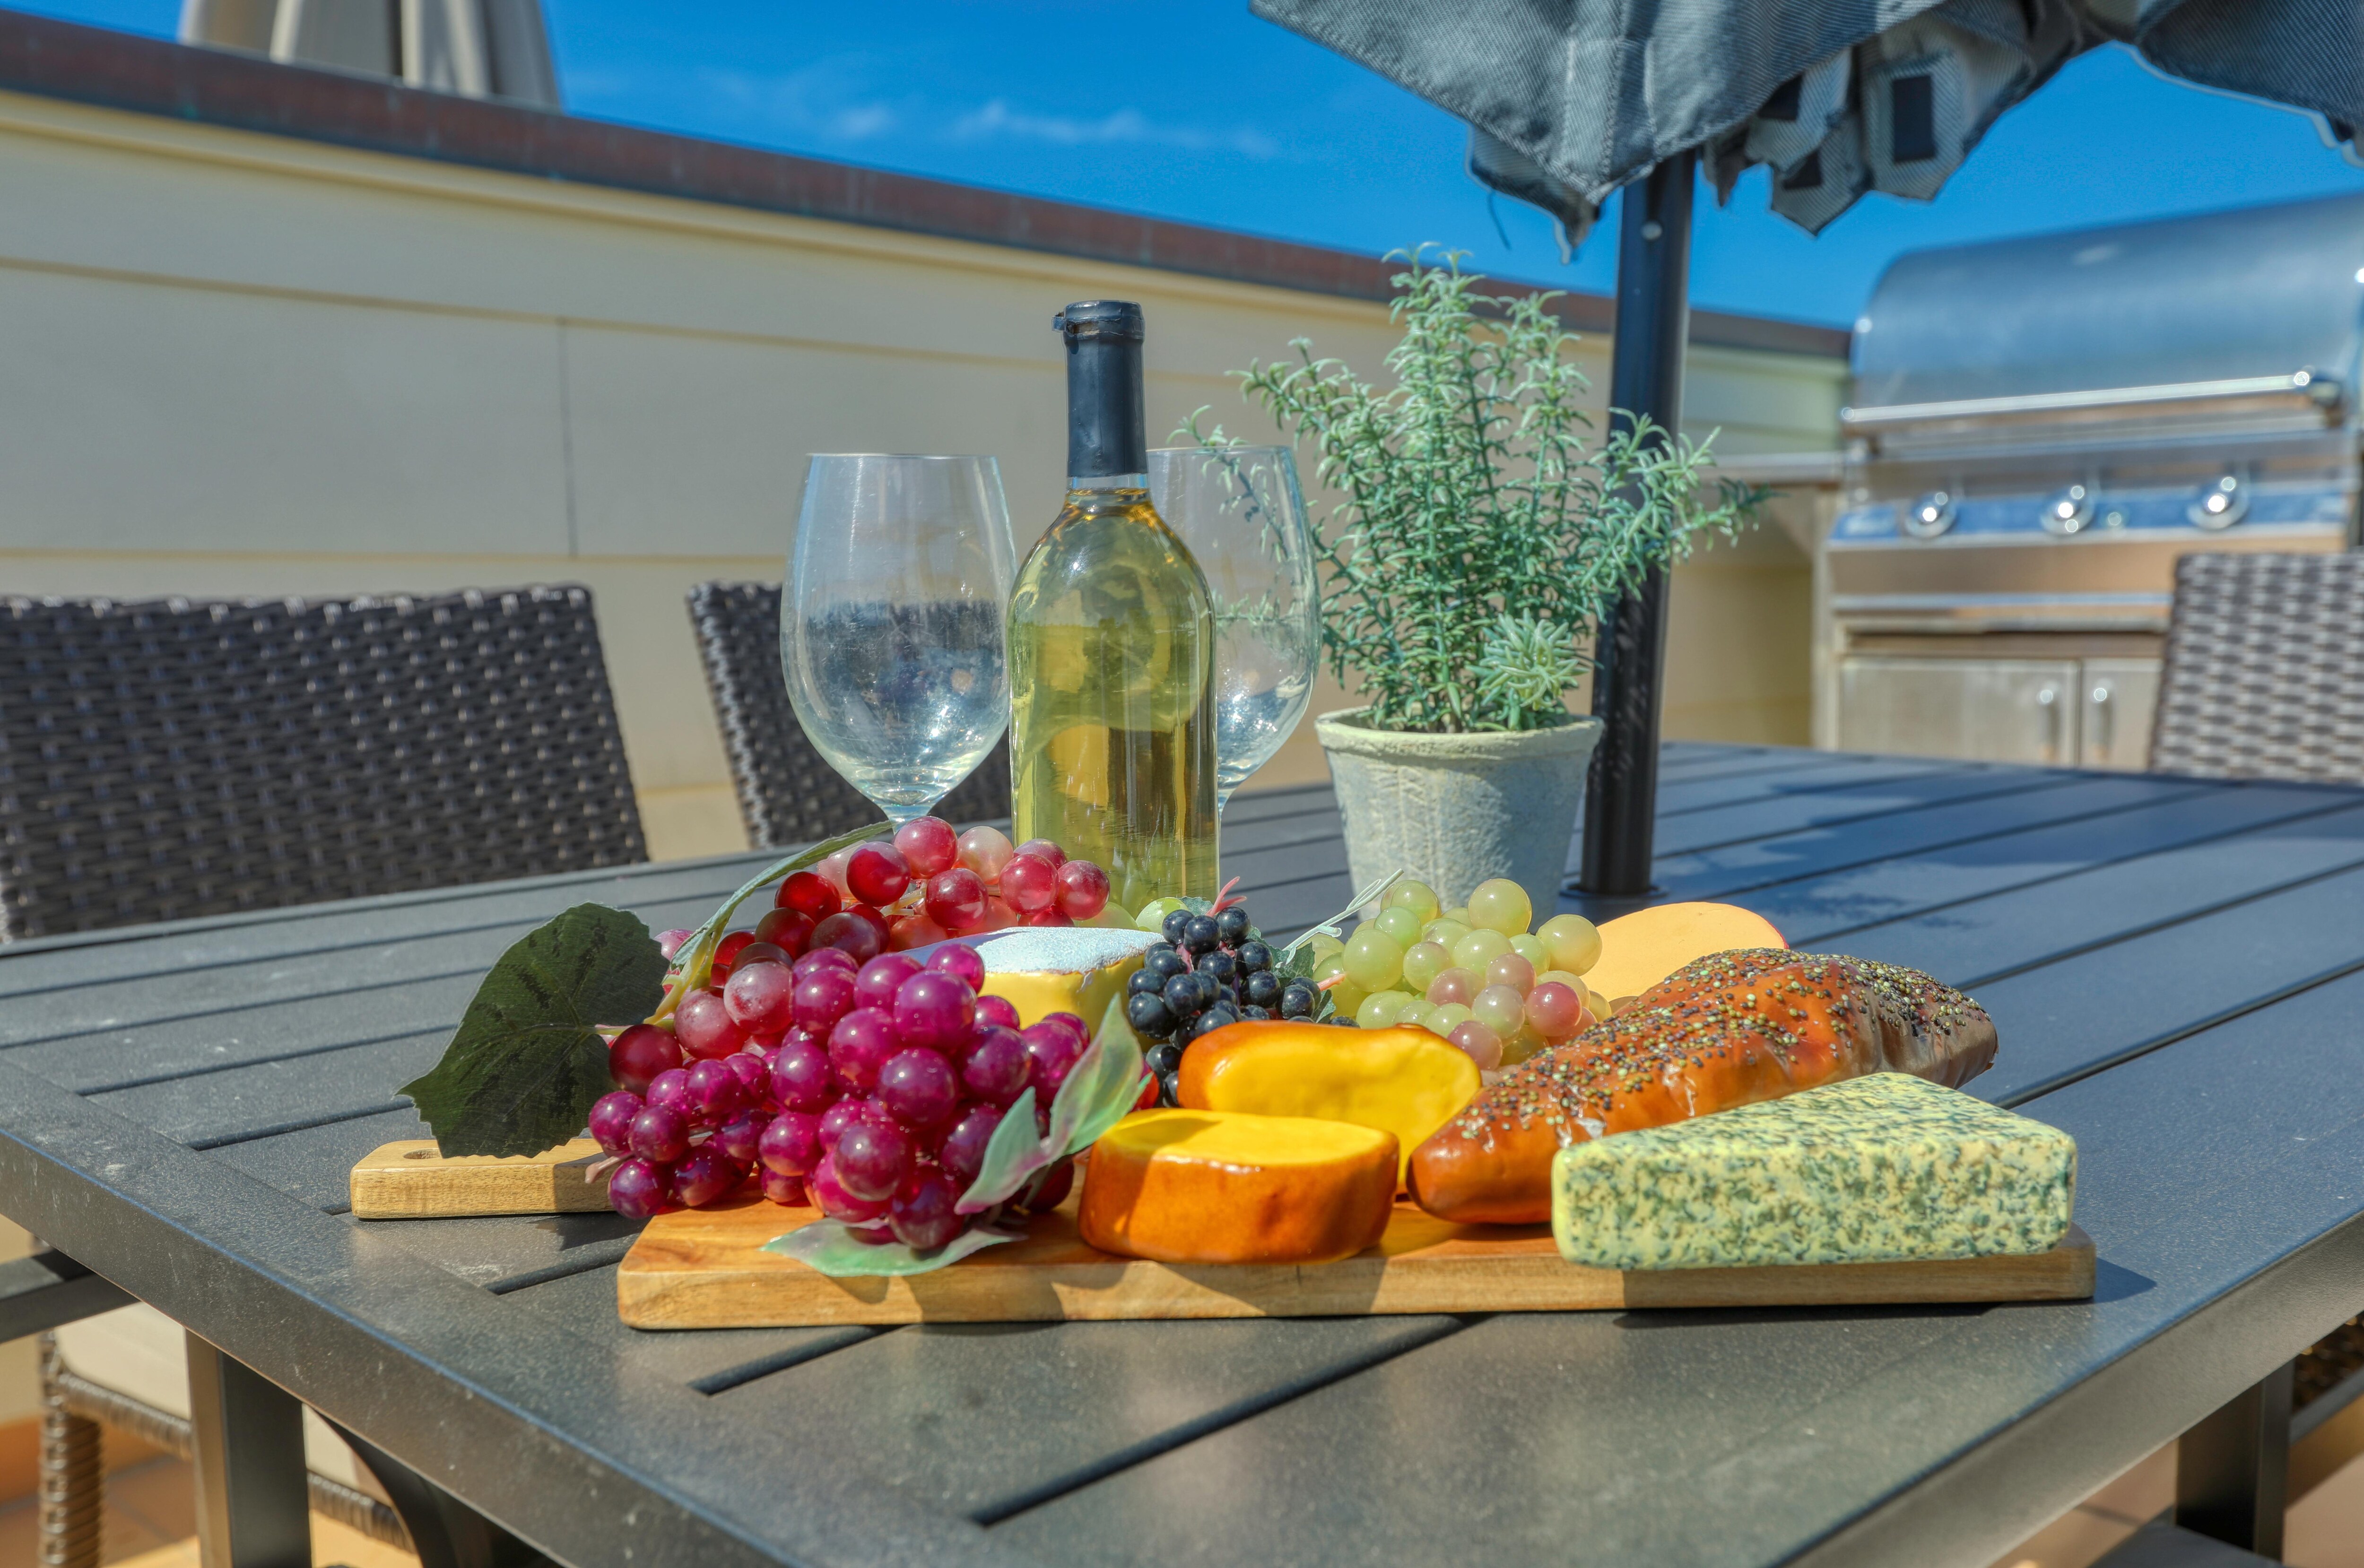 It's time for some farmer's market produce paired with your favorite Central Coast wine.